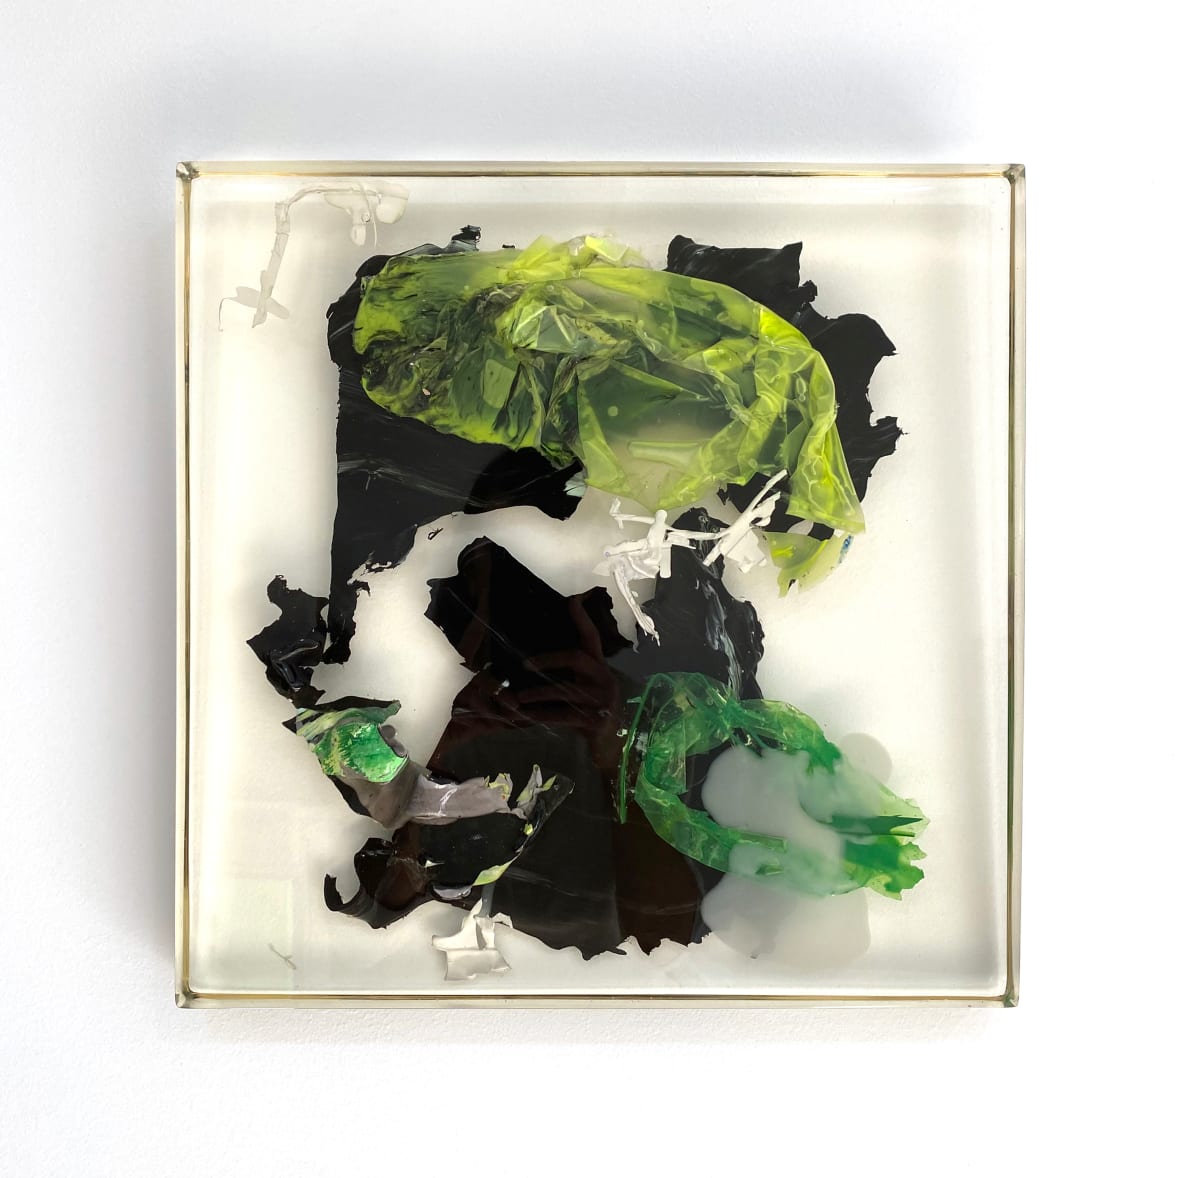 Lettuce Be Friends by Calina Hiriza  Image: "Lettuce Be Friends" – Acrylic paint skin in resin